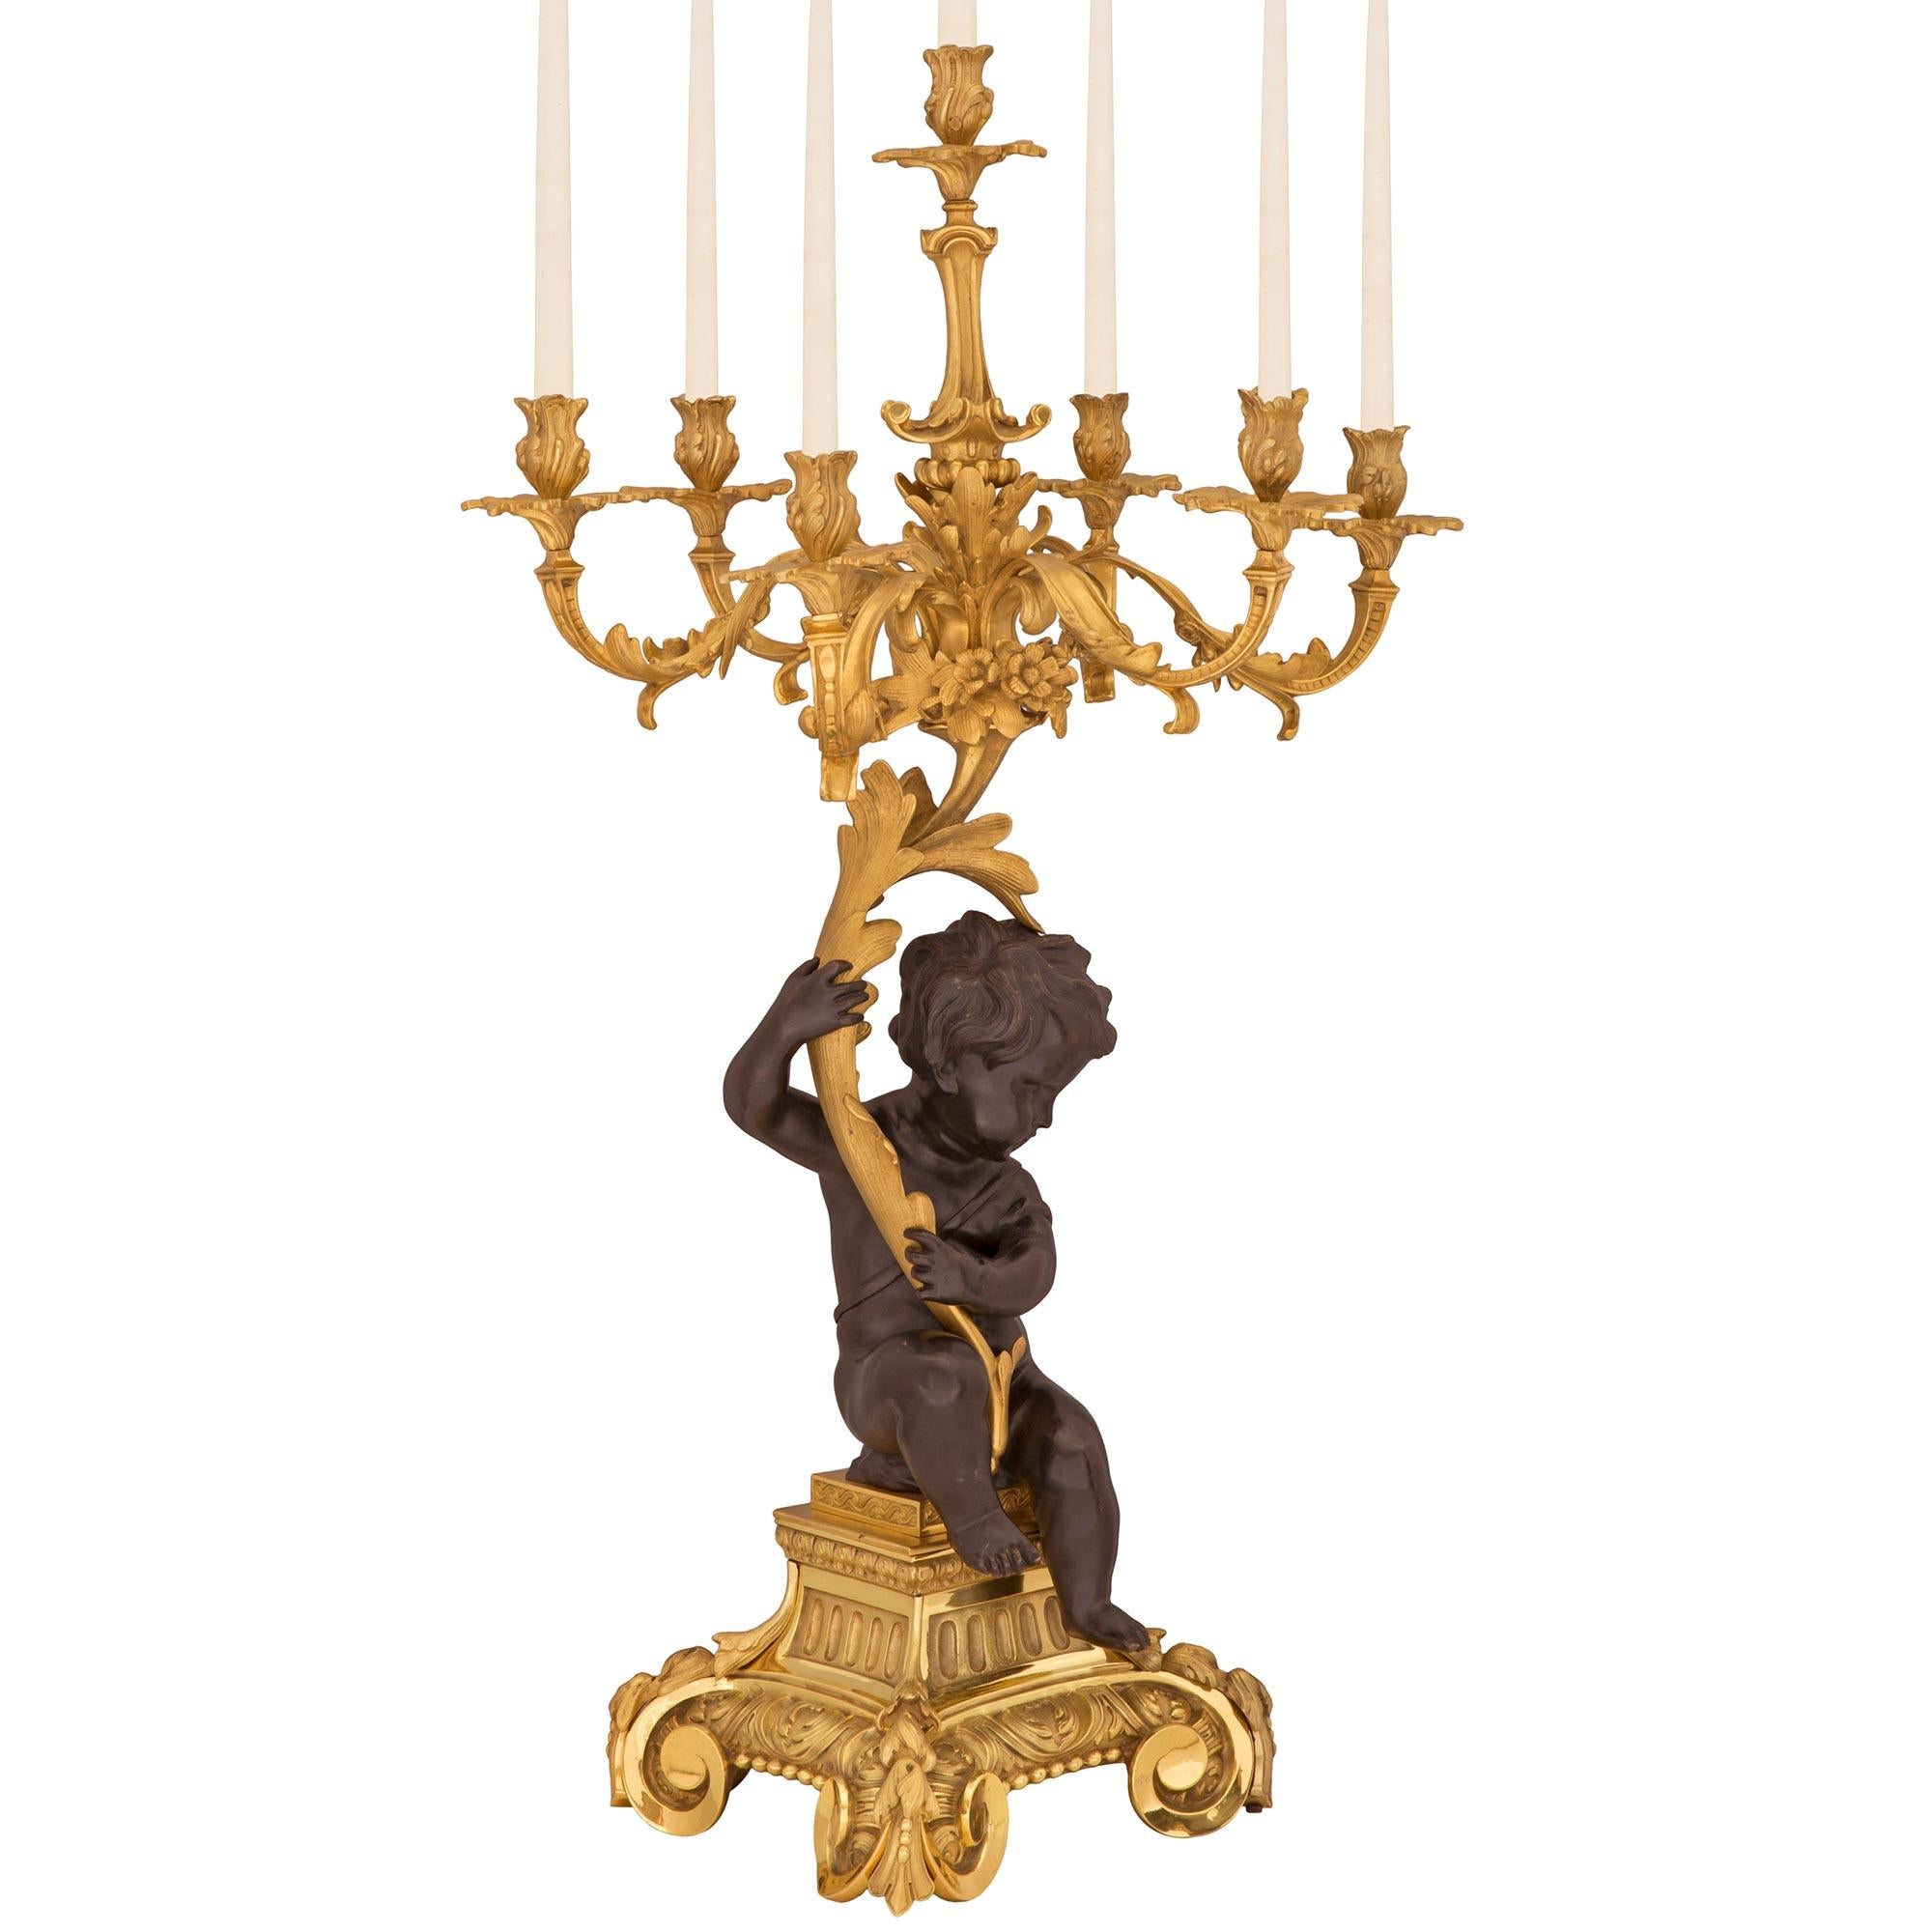 A spectacular and monumentally scaled true pair of French 19th century Louis XV st. ormolu and patinated bronze candelabras. Each seven arm candelabra is raised by a most impressive ormolu square base with stunning scrolled supports in a striking